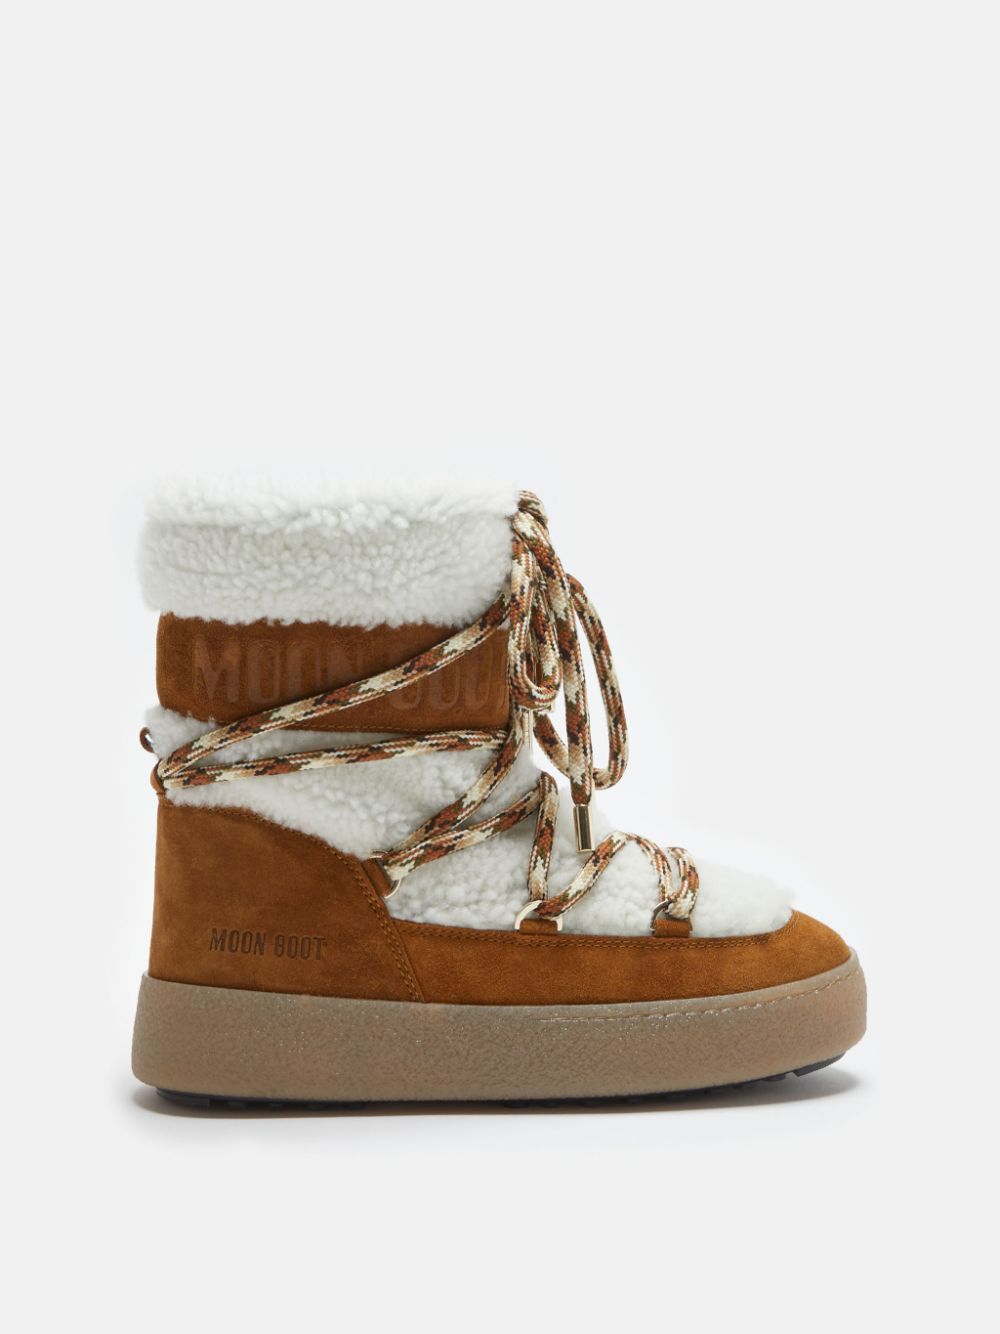 Mb Ltrack Shearling - Whisky/Off White